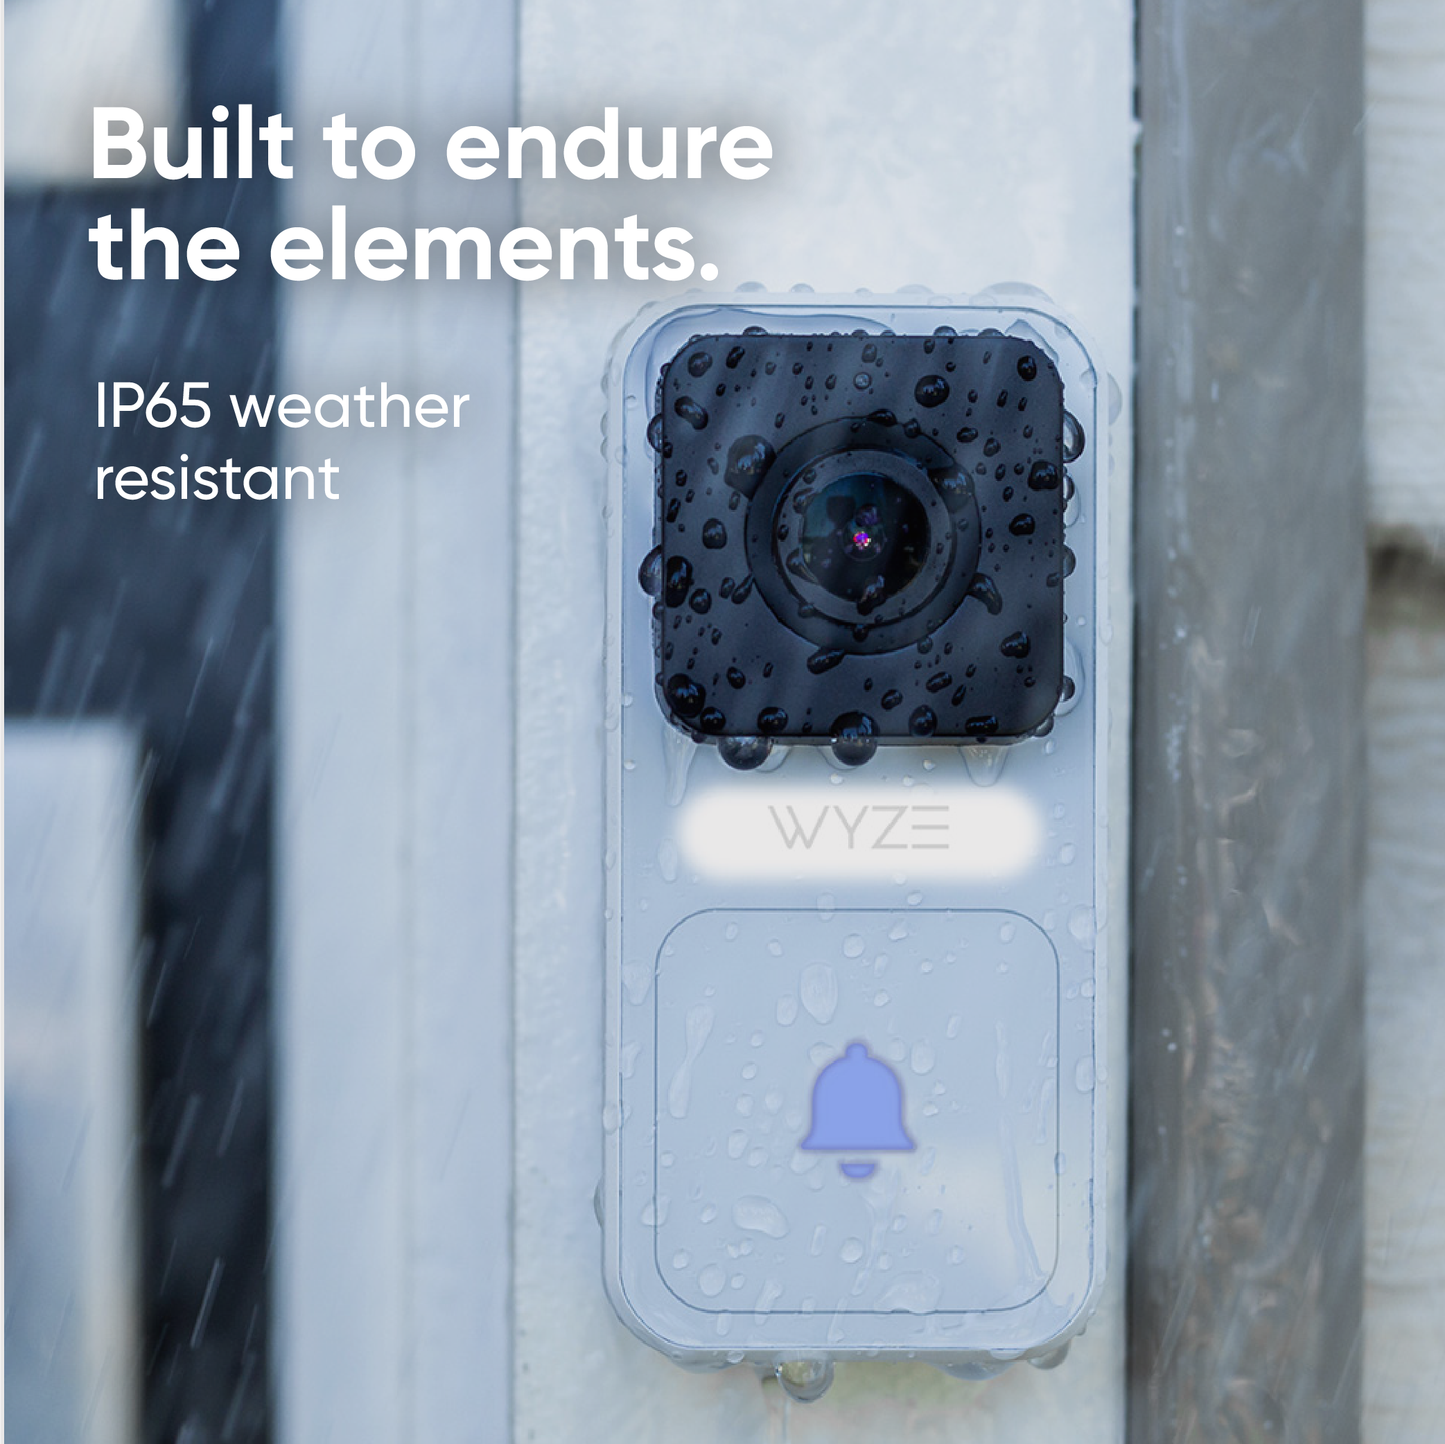 Wyze video doorbell with water droplets. Text overlay "IP65 Weather Resistant."